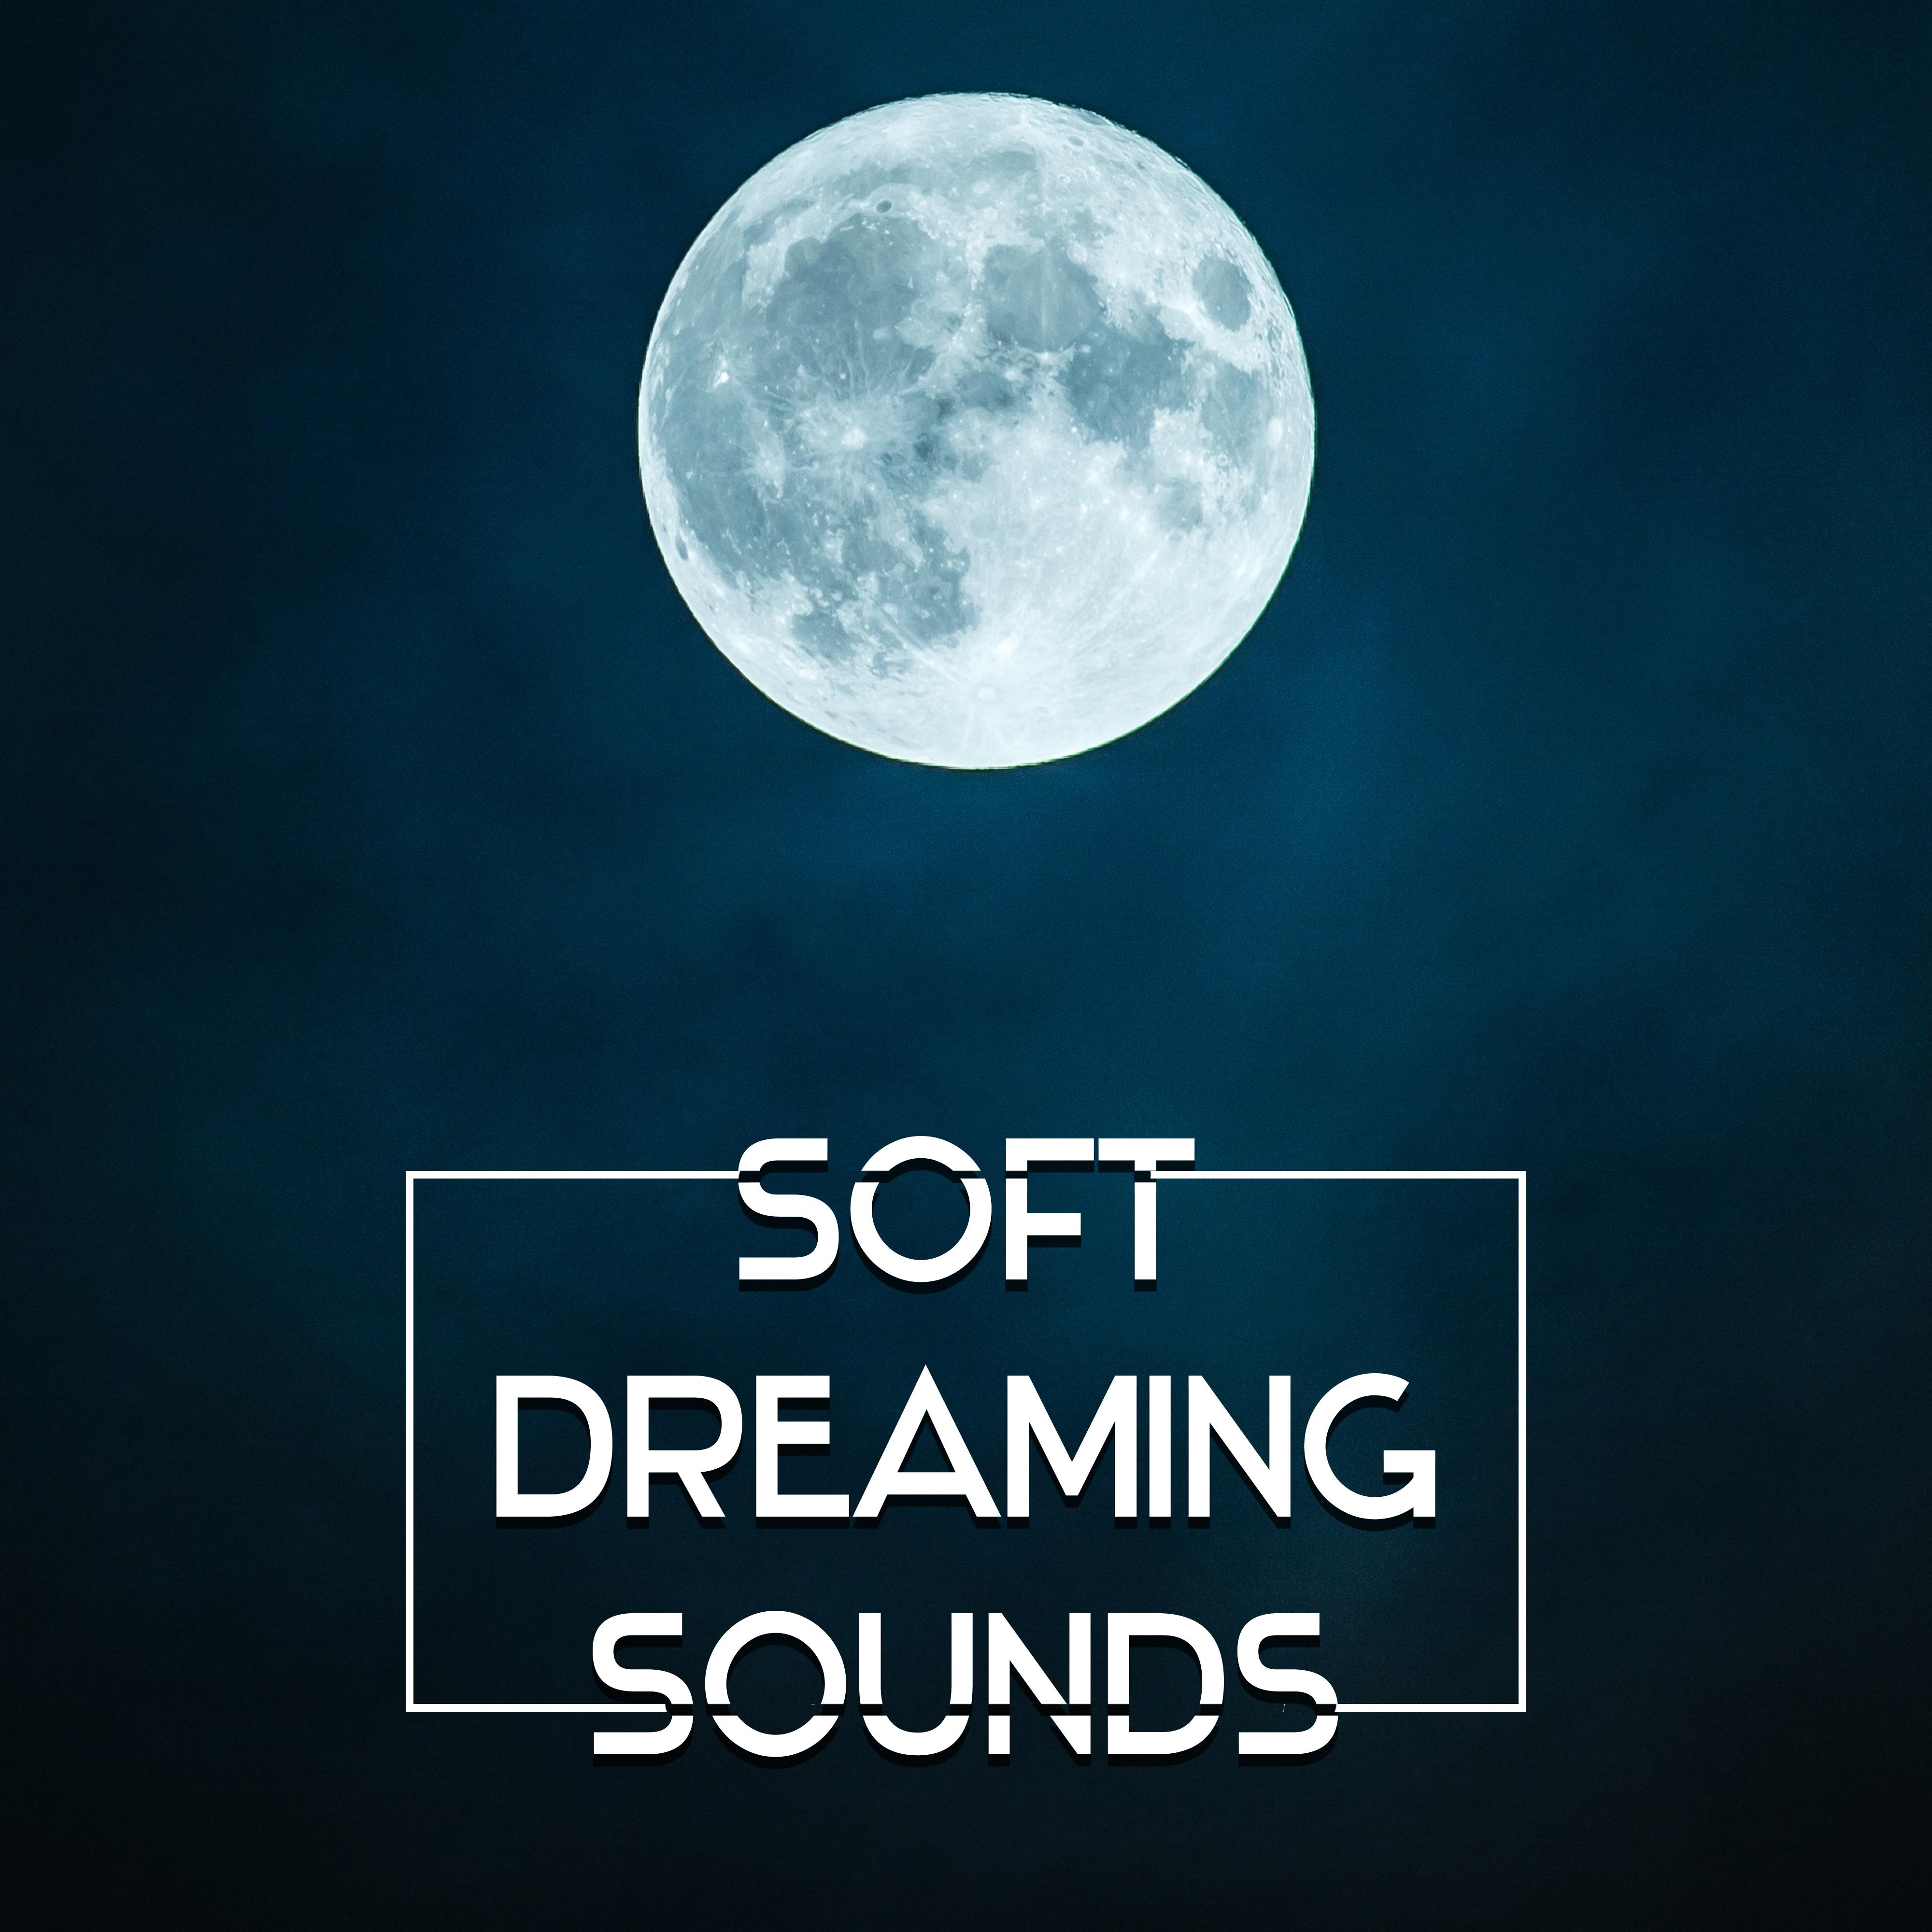 Soft Dreaming Sounds – Easy Listening New Age Songs, Music to Calm Sleep, Rest in Bed, Nature Waves